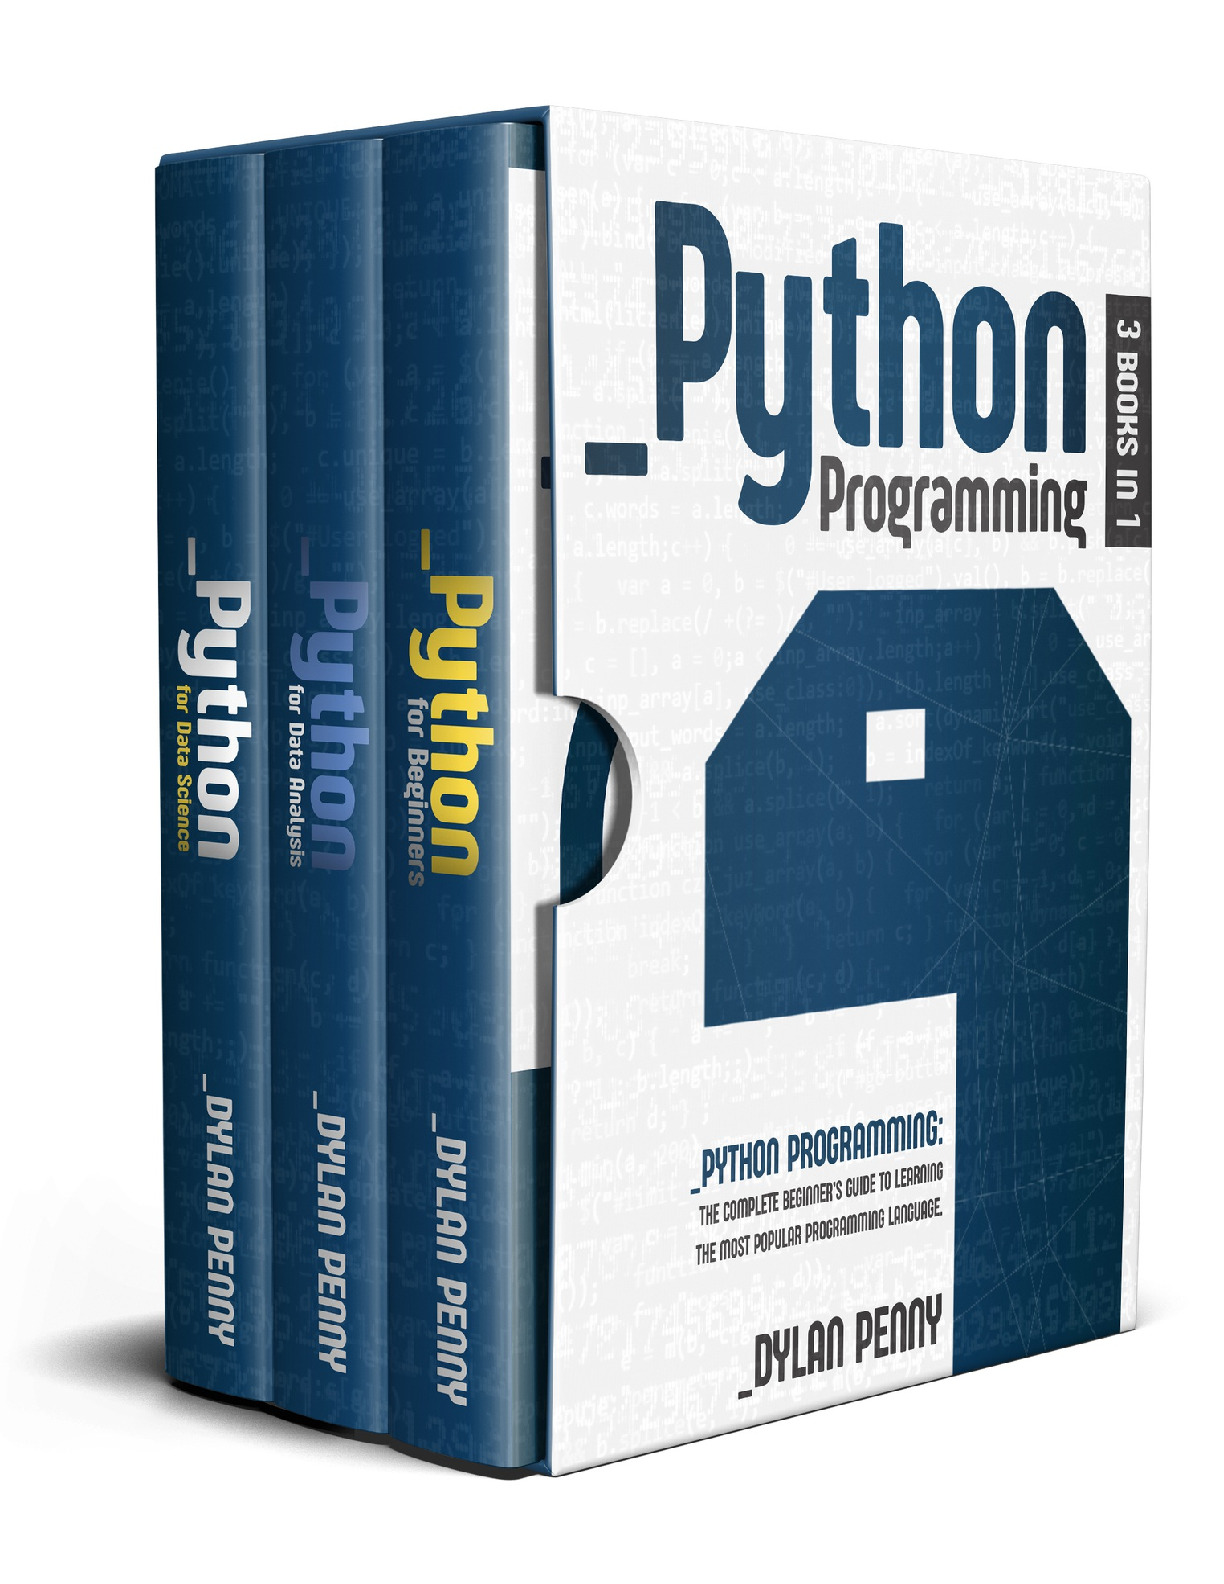 Python programming 3 Books in 1 The Complete Beginner’s Guide to Learning the Most Popular Programming Language by Penny, Dylan (z-lib.org)